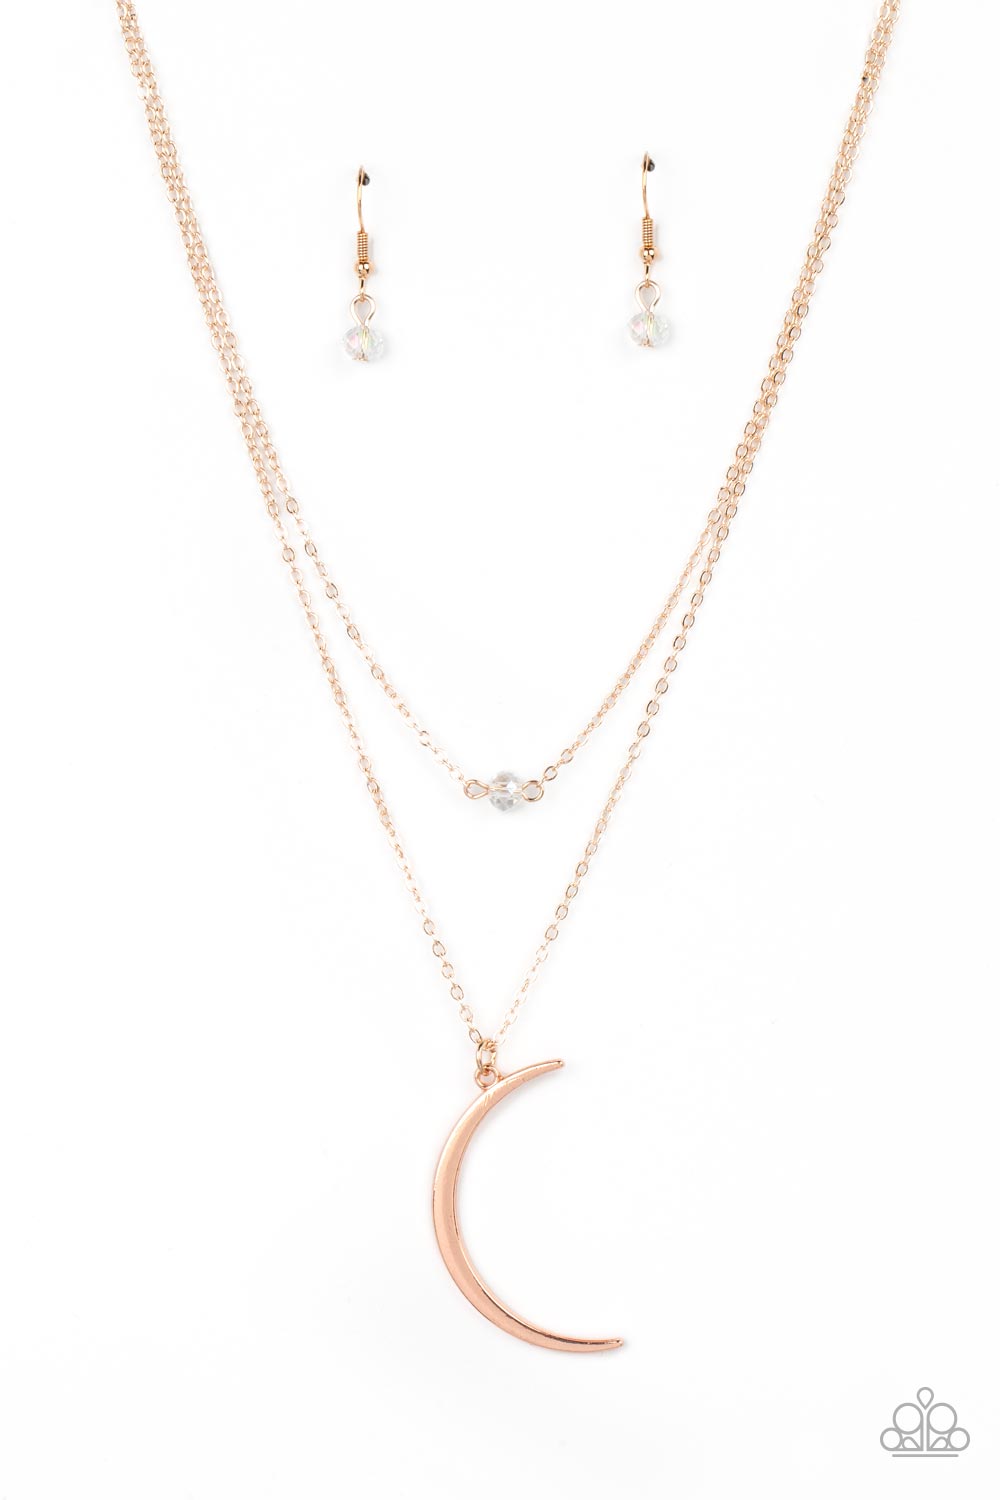 Modern Moonbeam Rose Gold Necklace Paparazzi Accessories. Subscribe & Save. #P2DA-GDRS-286XX